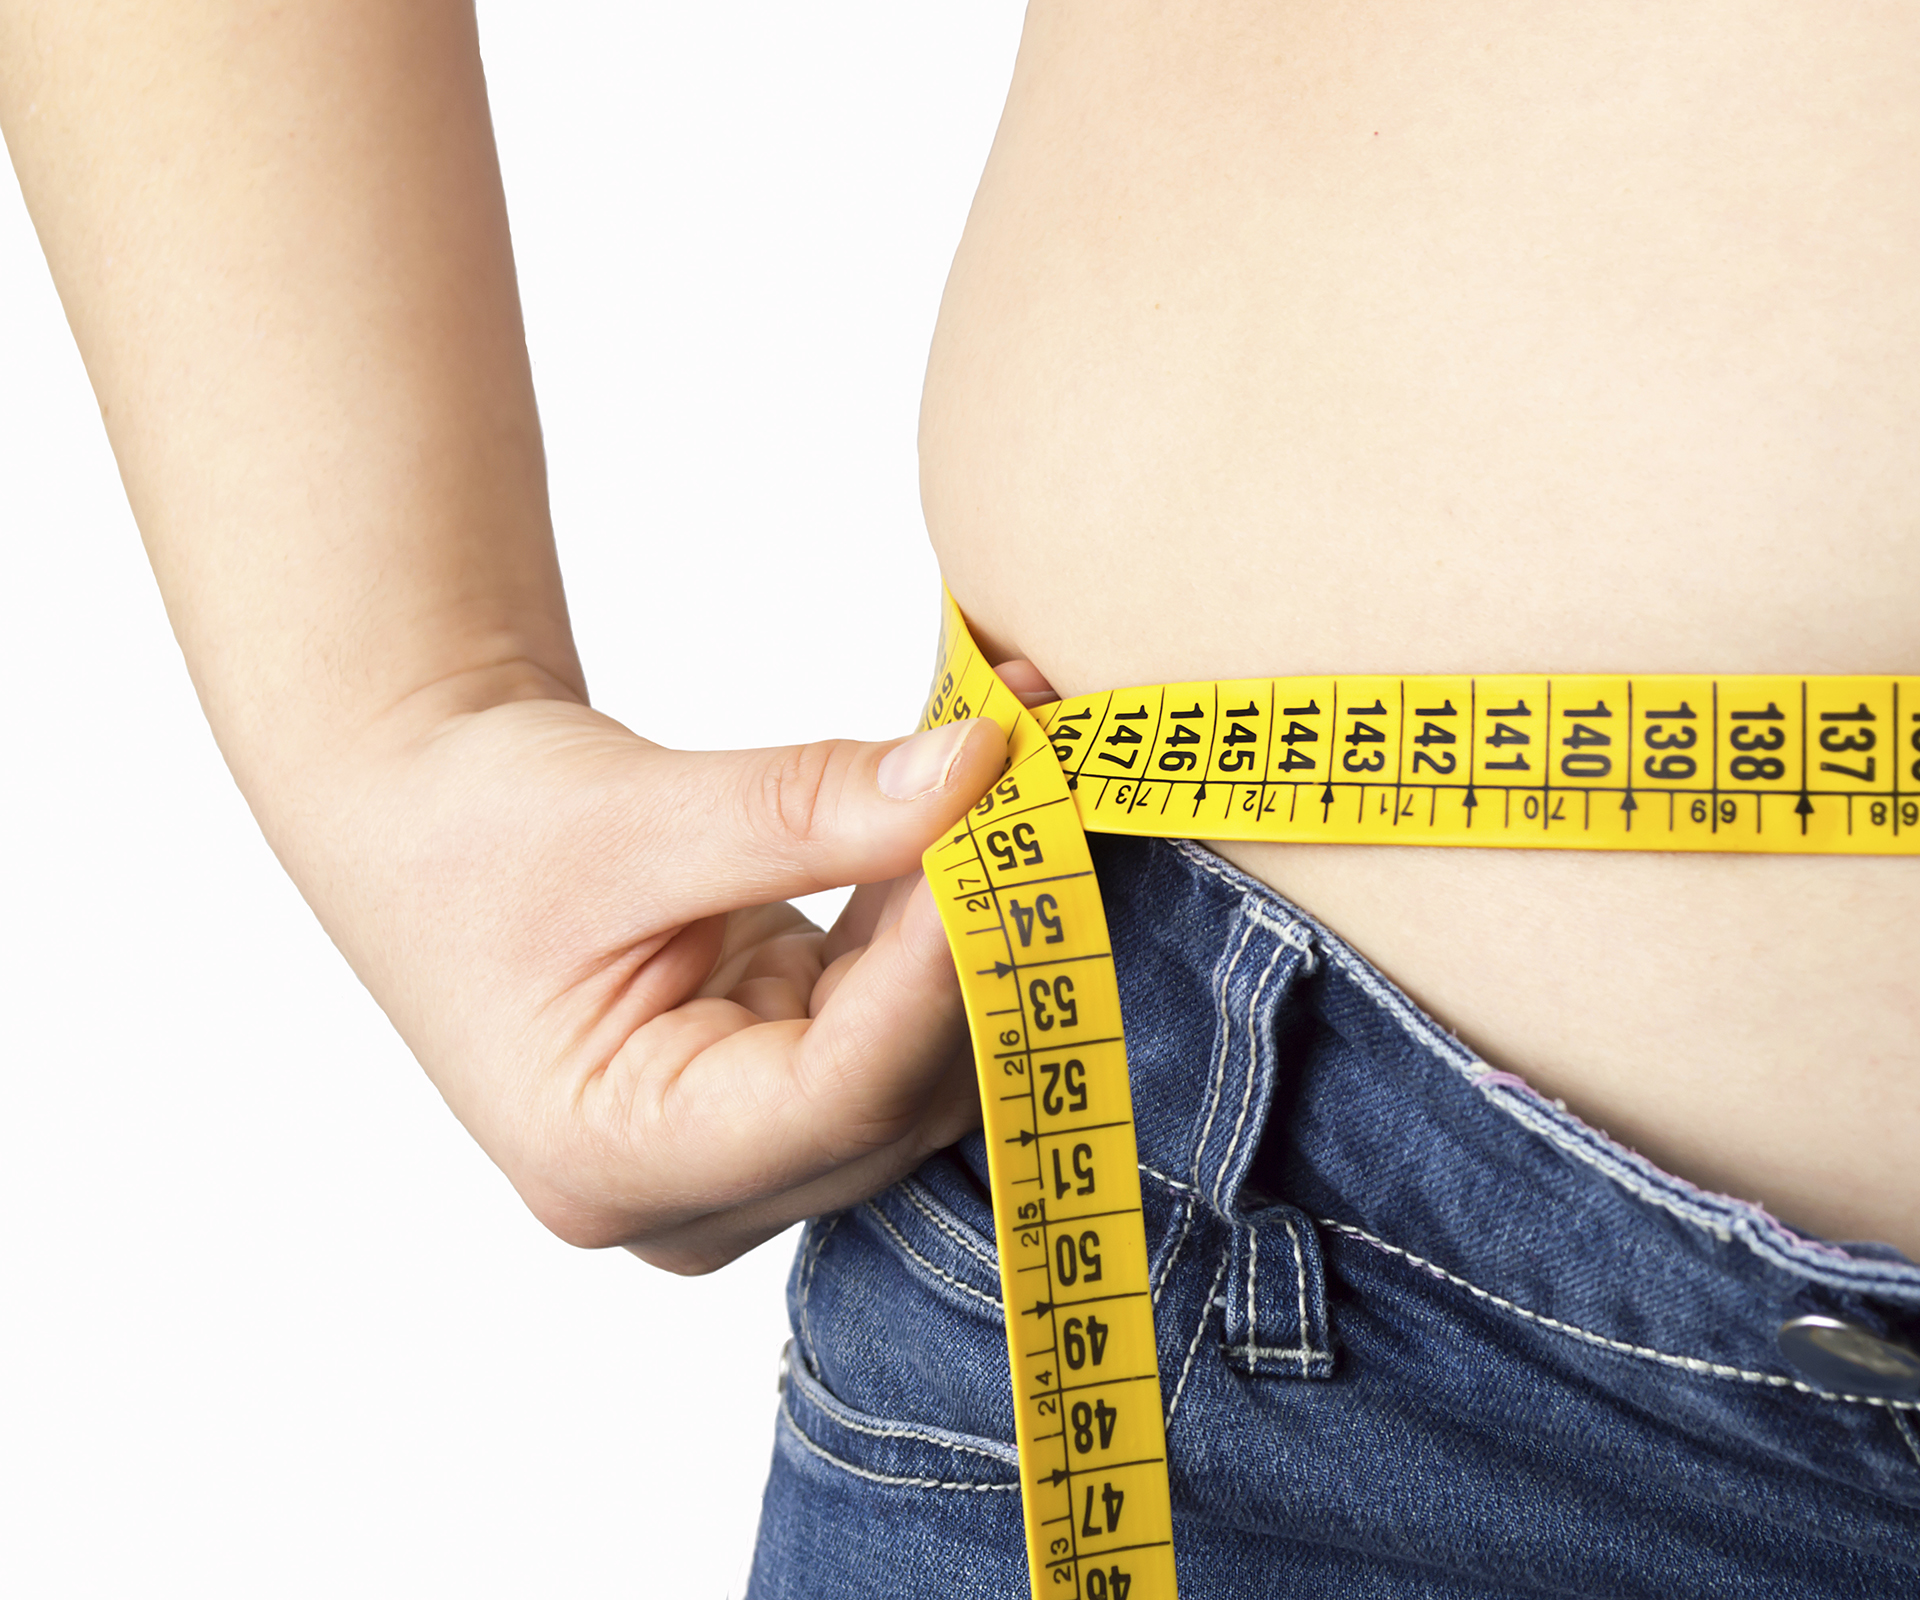 Weight loss breakthrough: Scientists reveal you can ‘switch off’ your fat gene